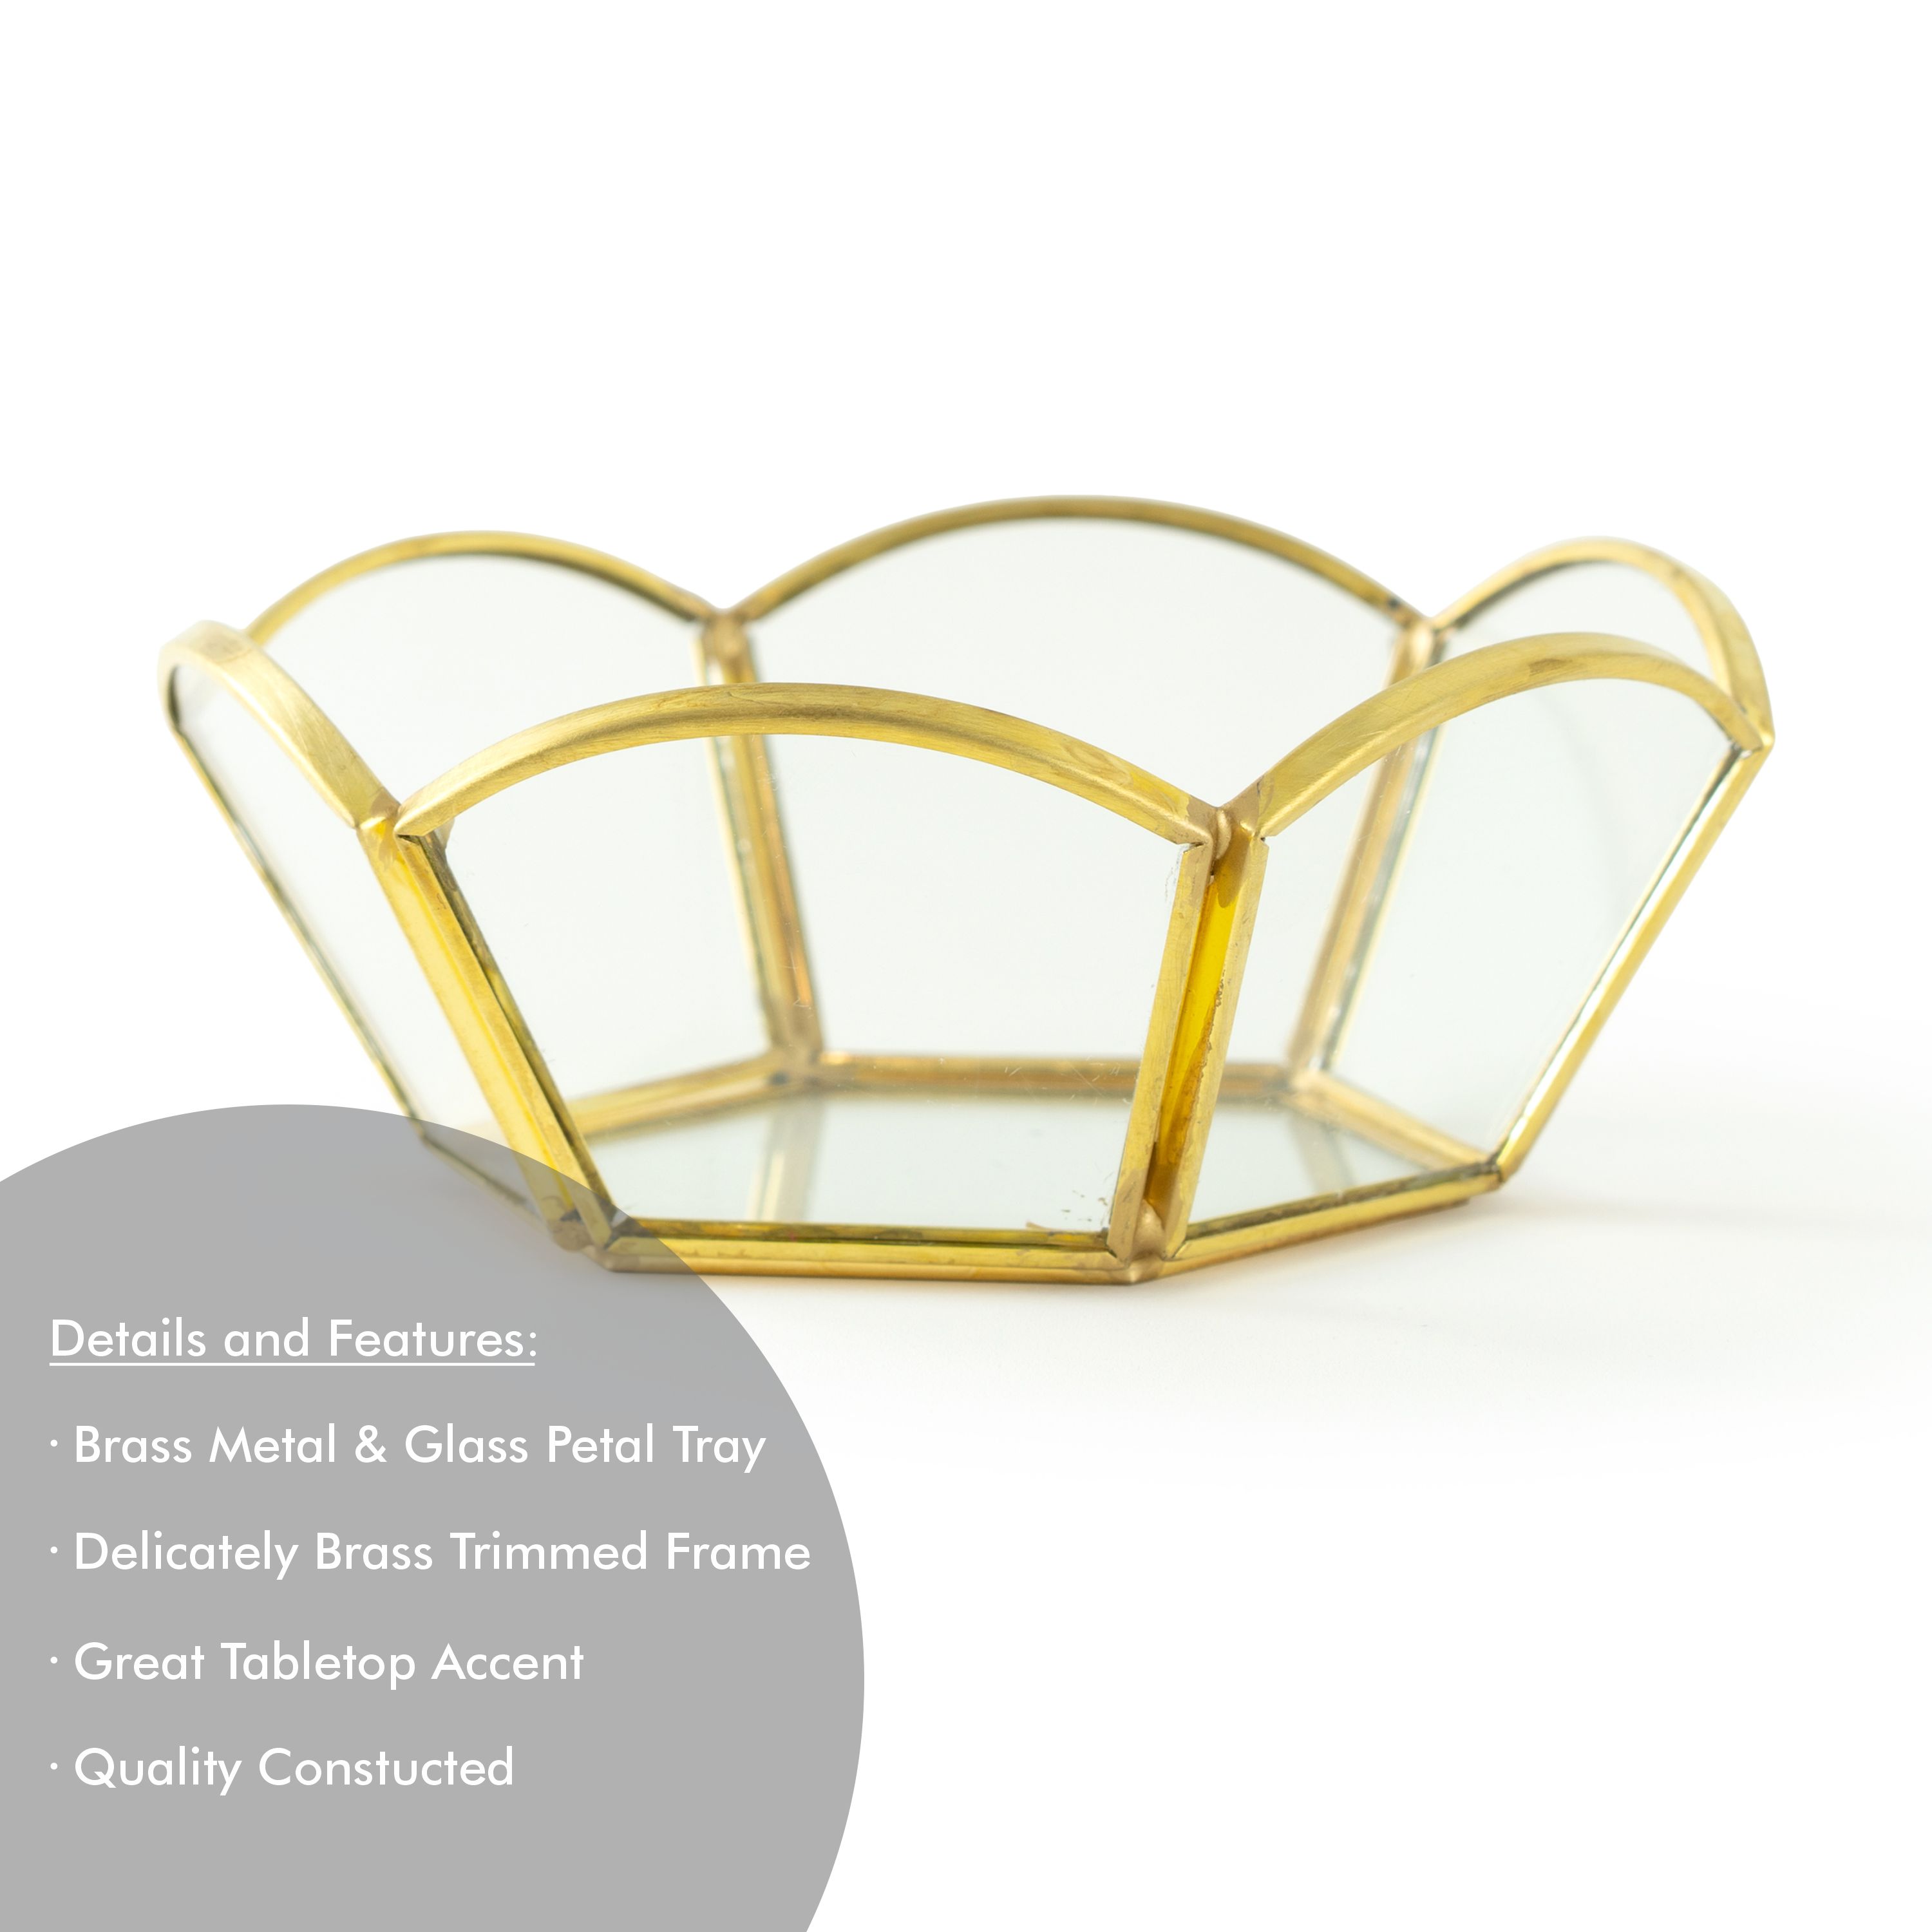 Brass and Glass Gold 4.4" Tabletop Trinket Tray with Decorative Petals - image 2 of 7